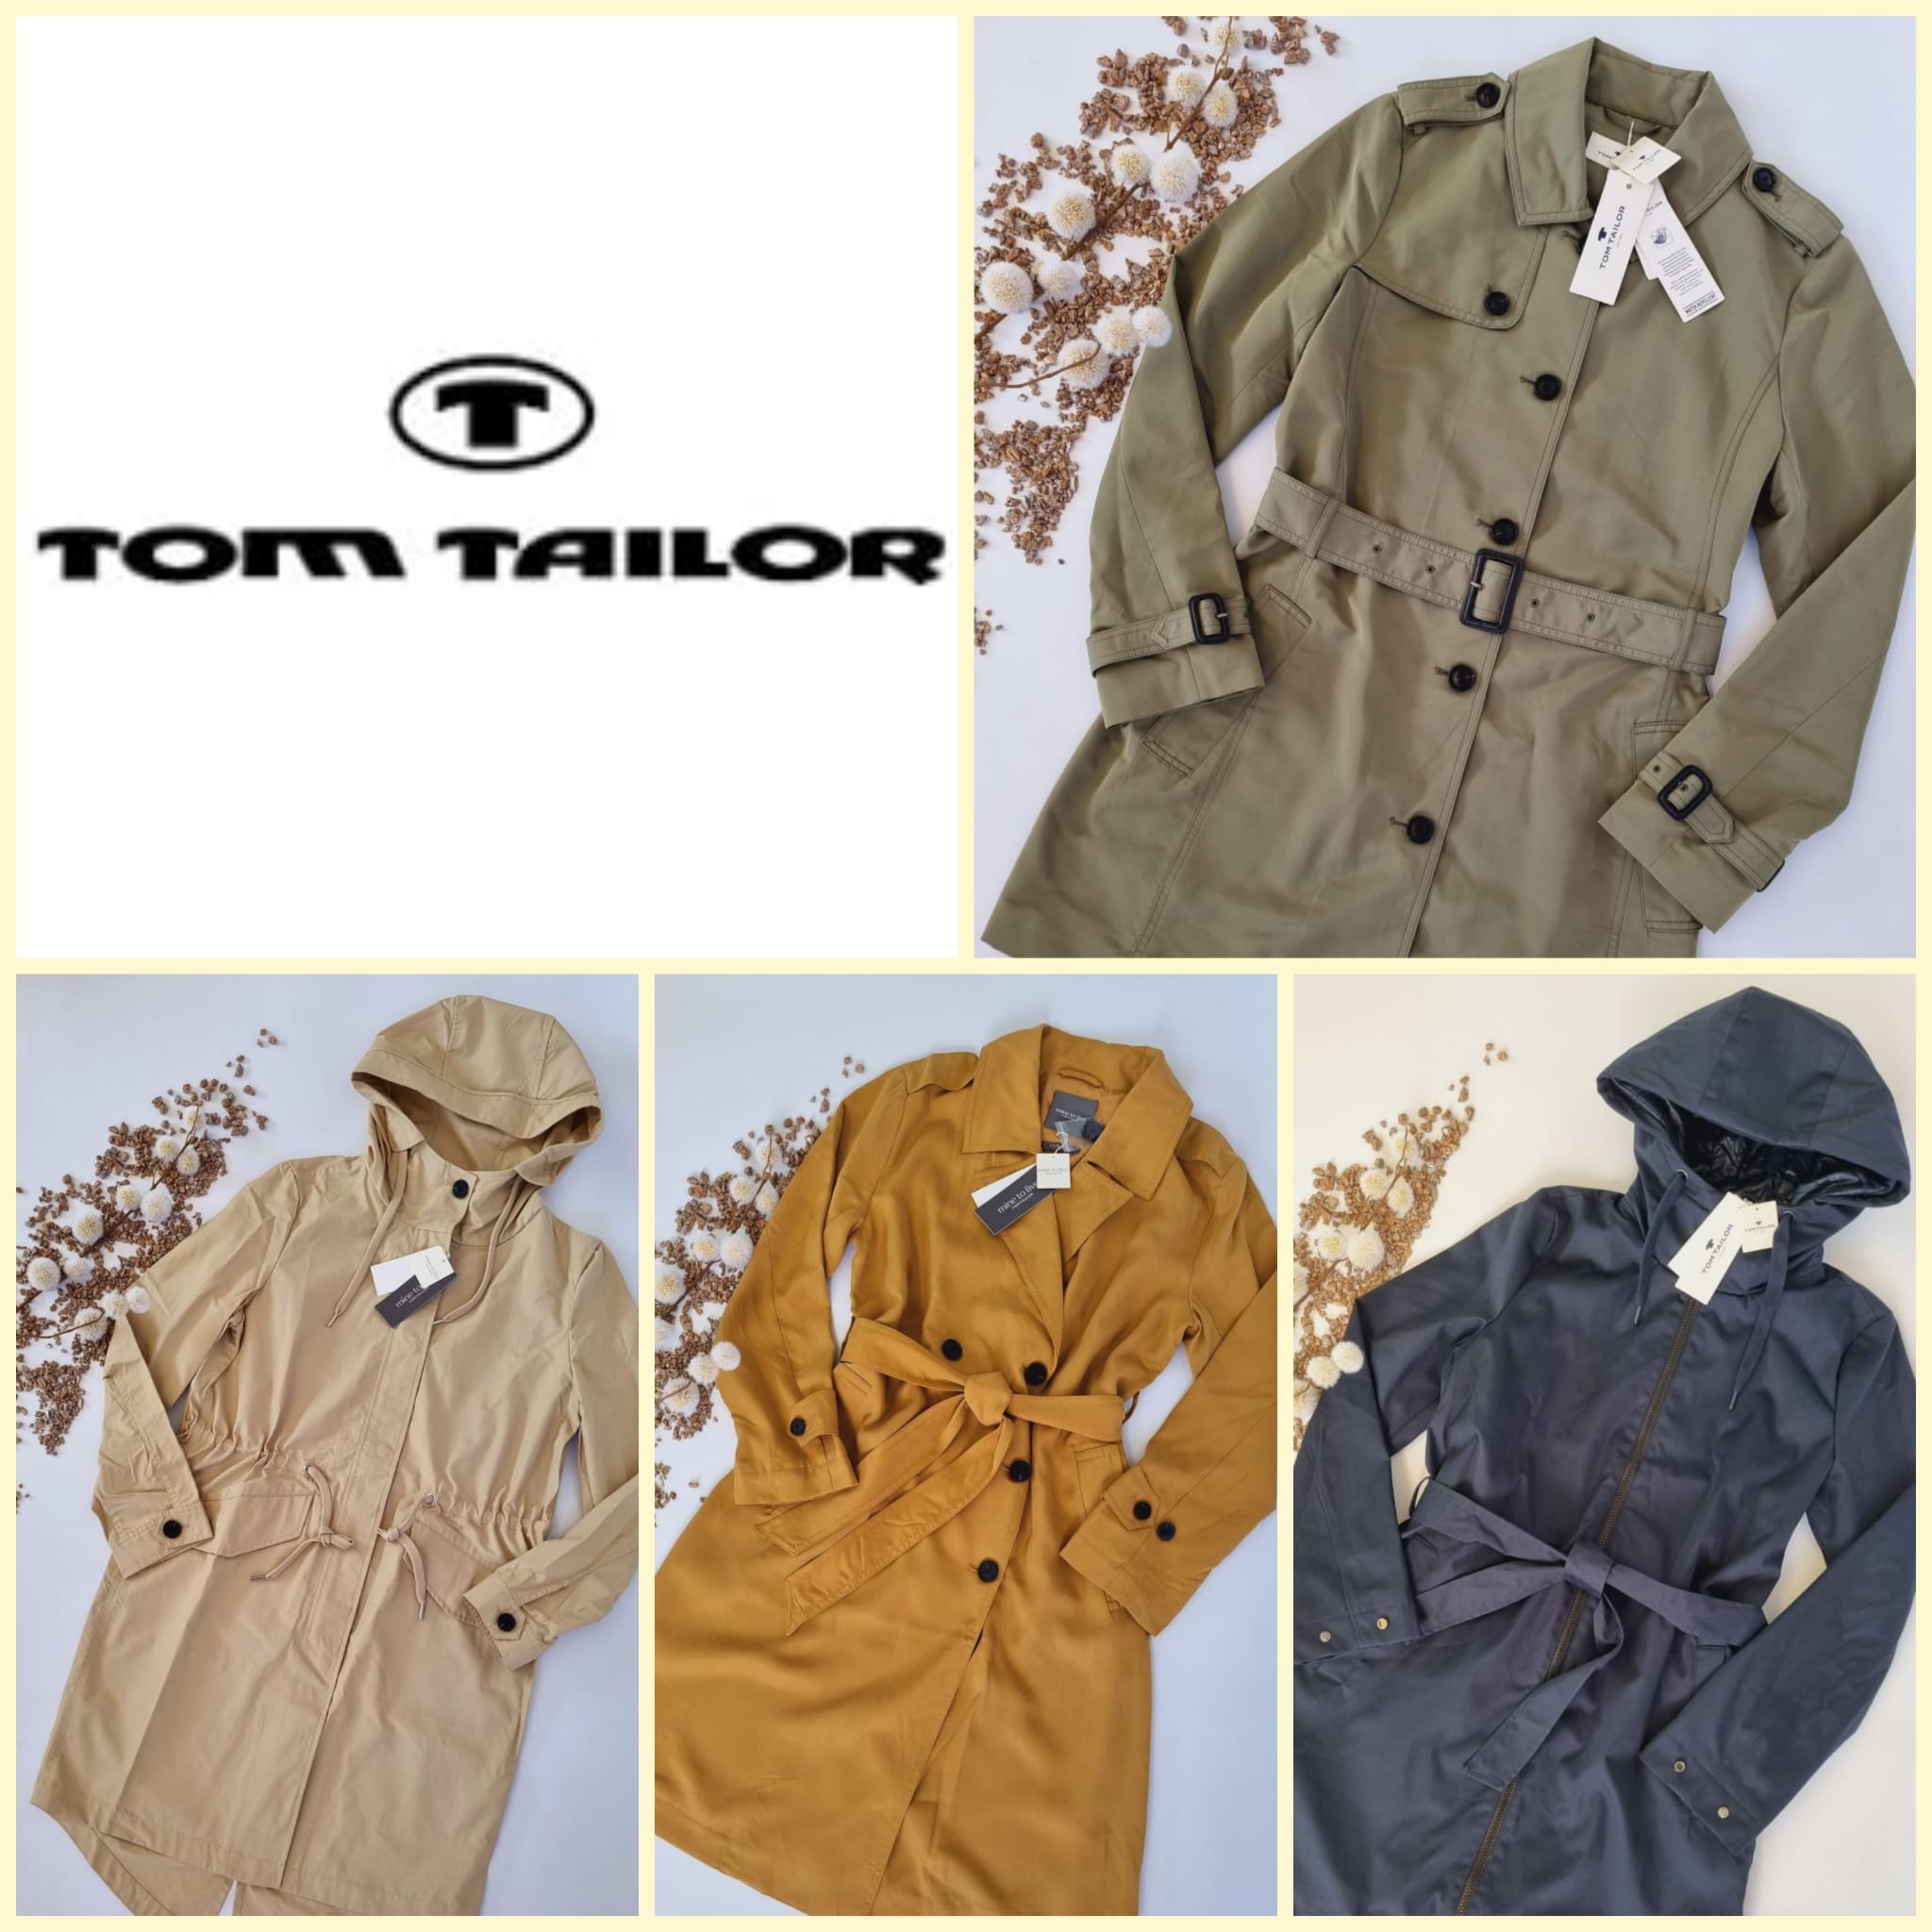 Women's trench coats from Tom Tailor